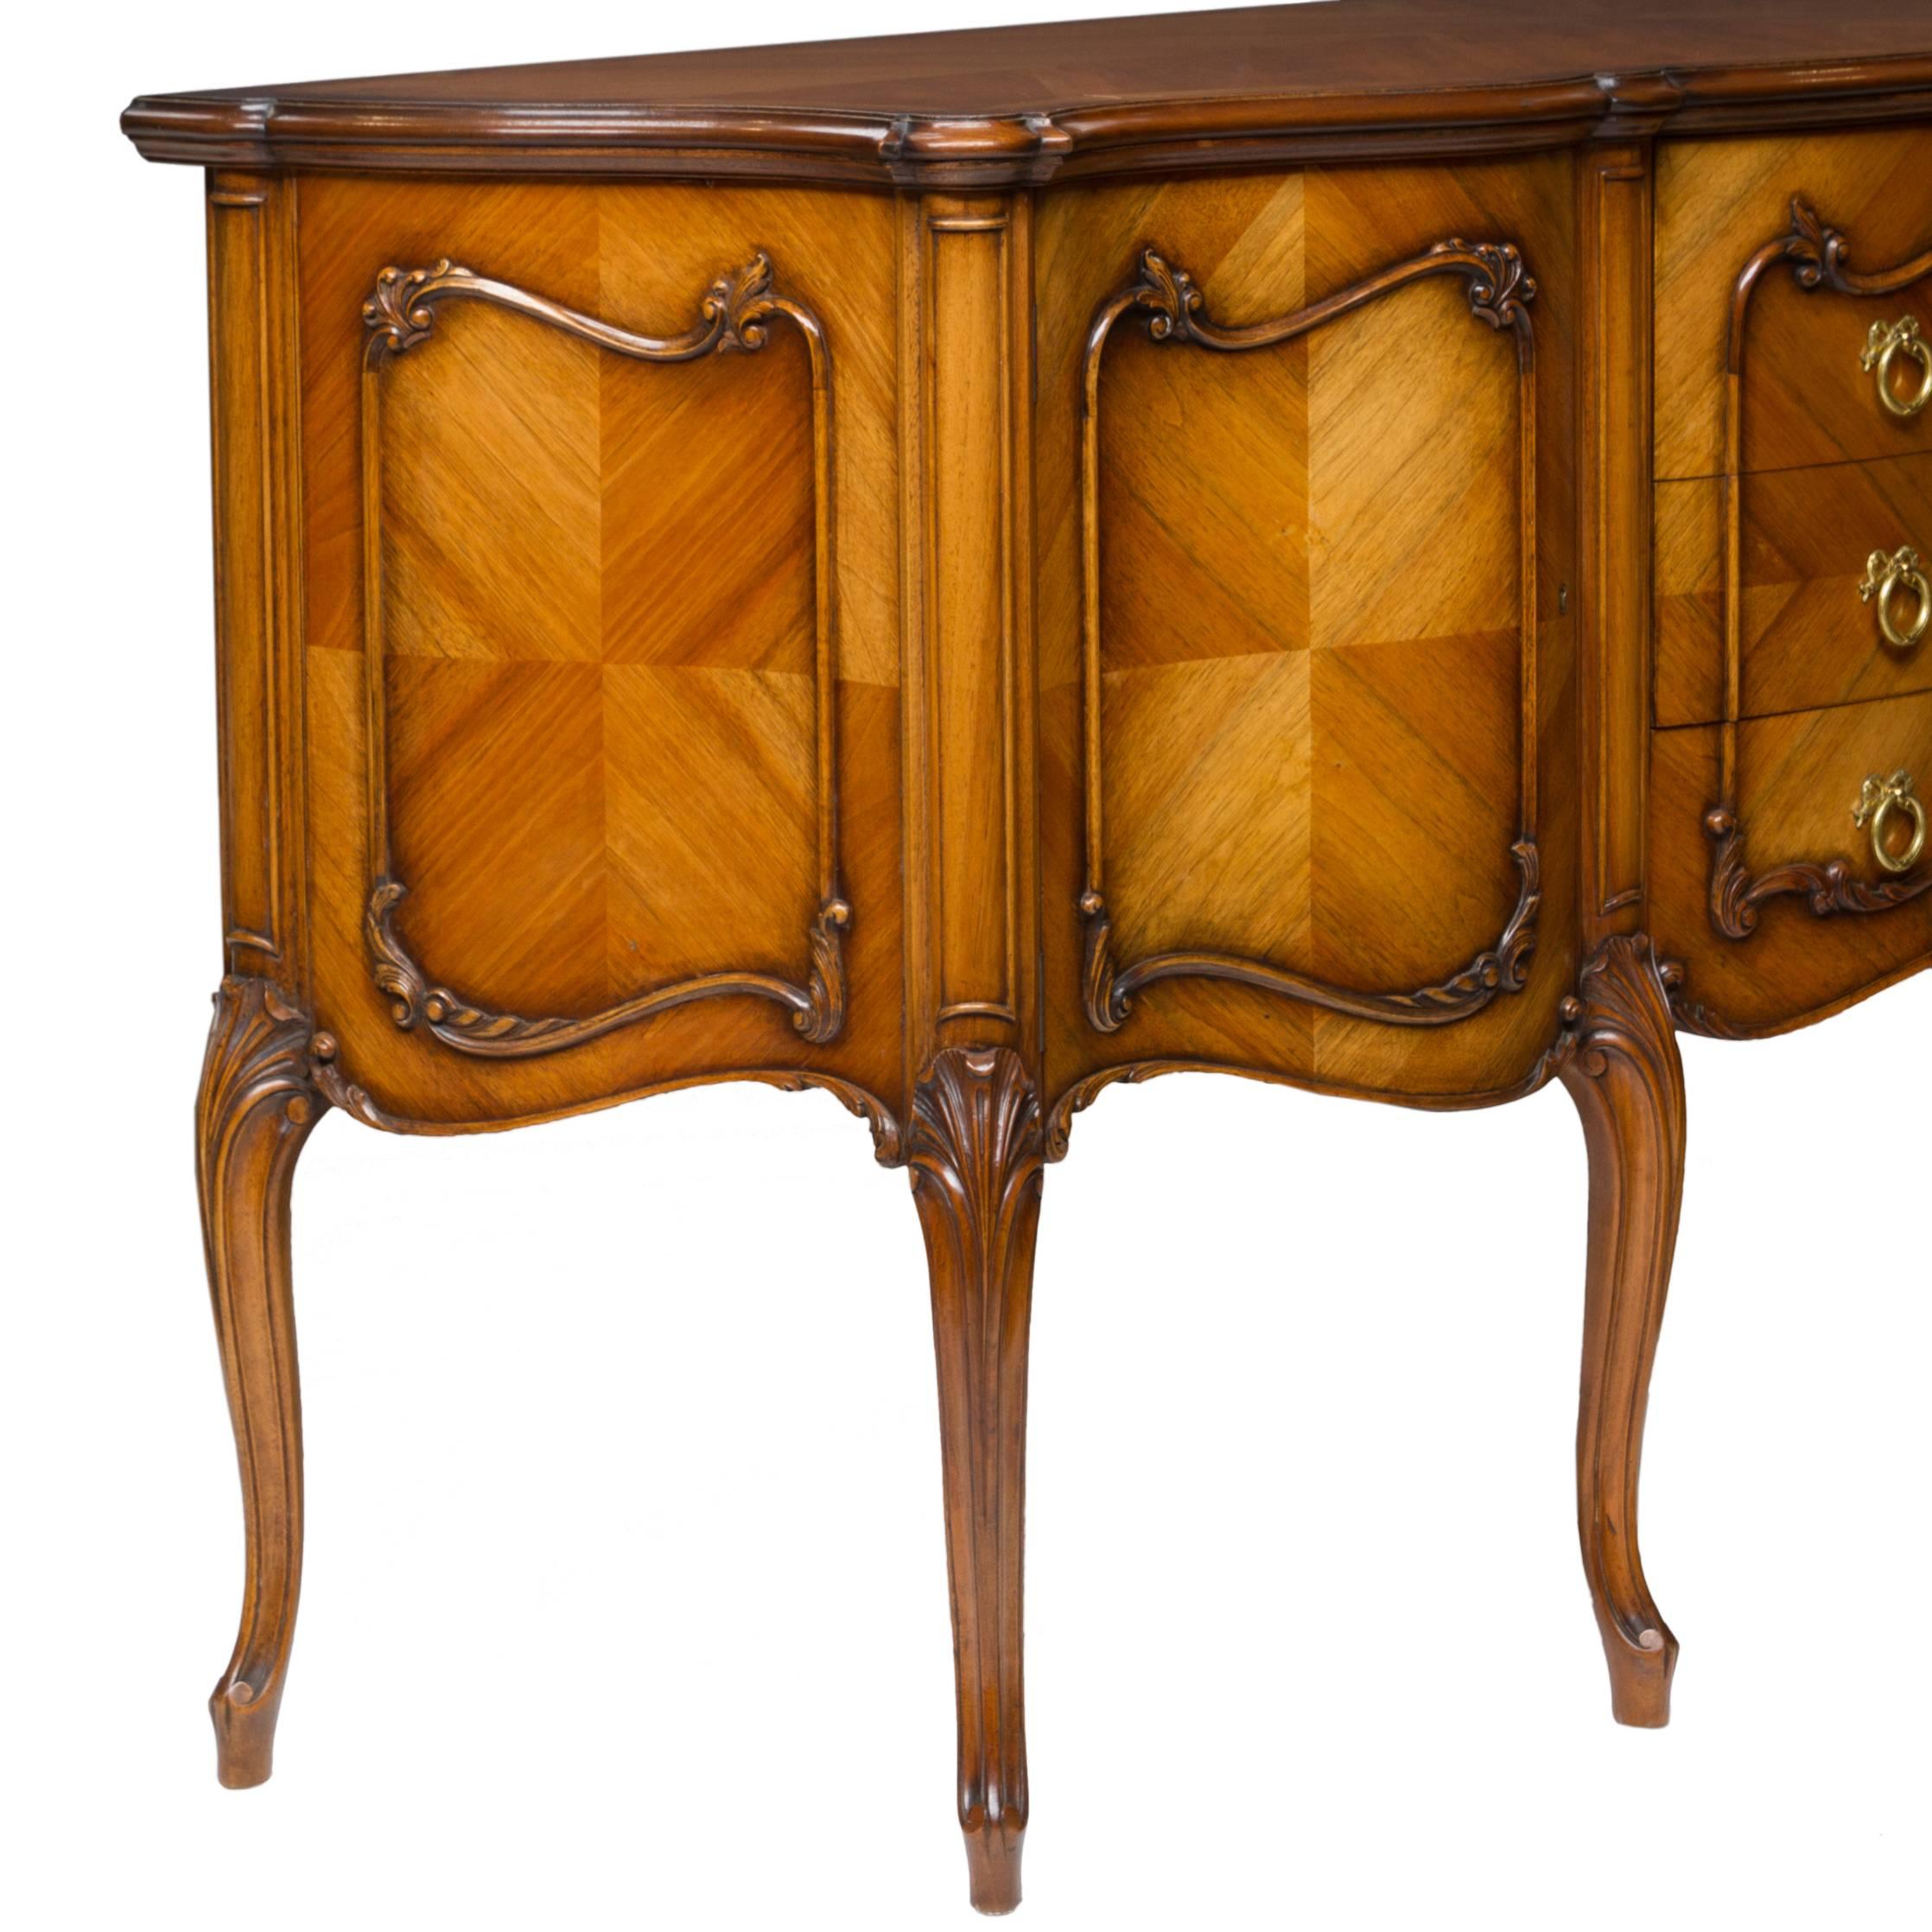 A very clean English made (signed Maples) sideboard. French Provincial in style. Just a well made and functional sideboard. French polished. Quality ormolu pulls. Made of walnut and beautiful cuts of walnut bookmatched veneers, circa 1900s-1920s.